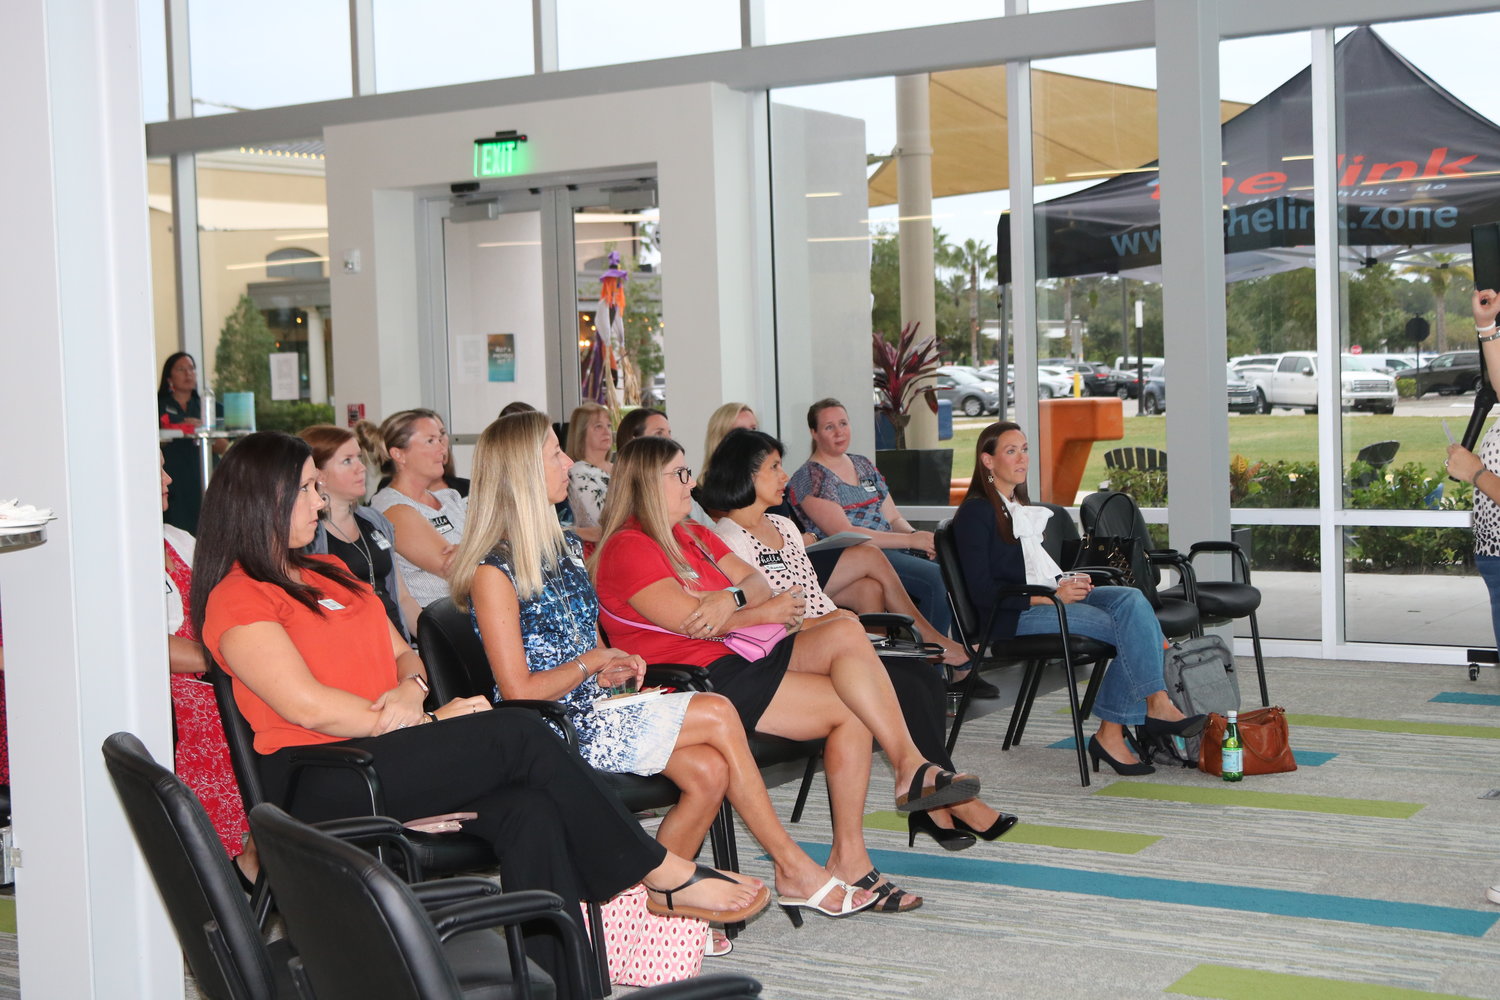 Women Empowering Women attracted a sizable audience to their recent presentation at the link.